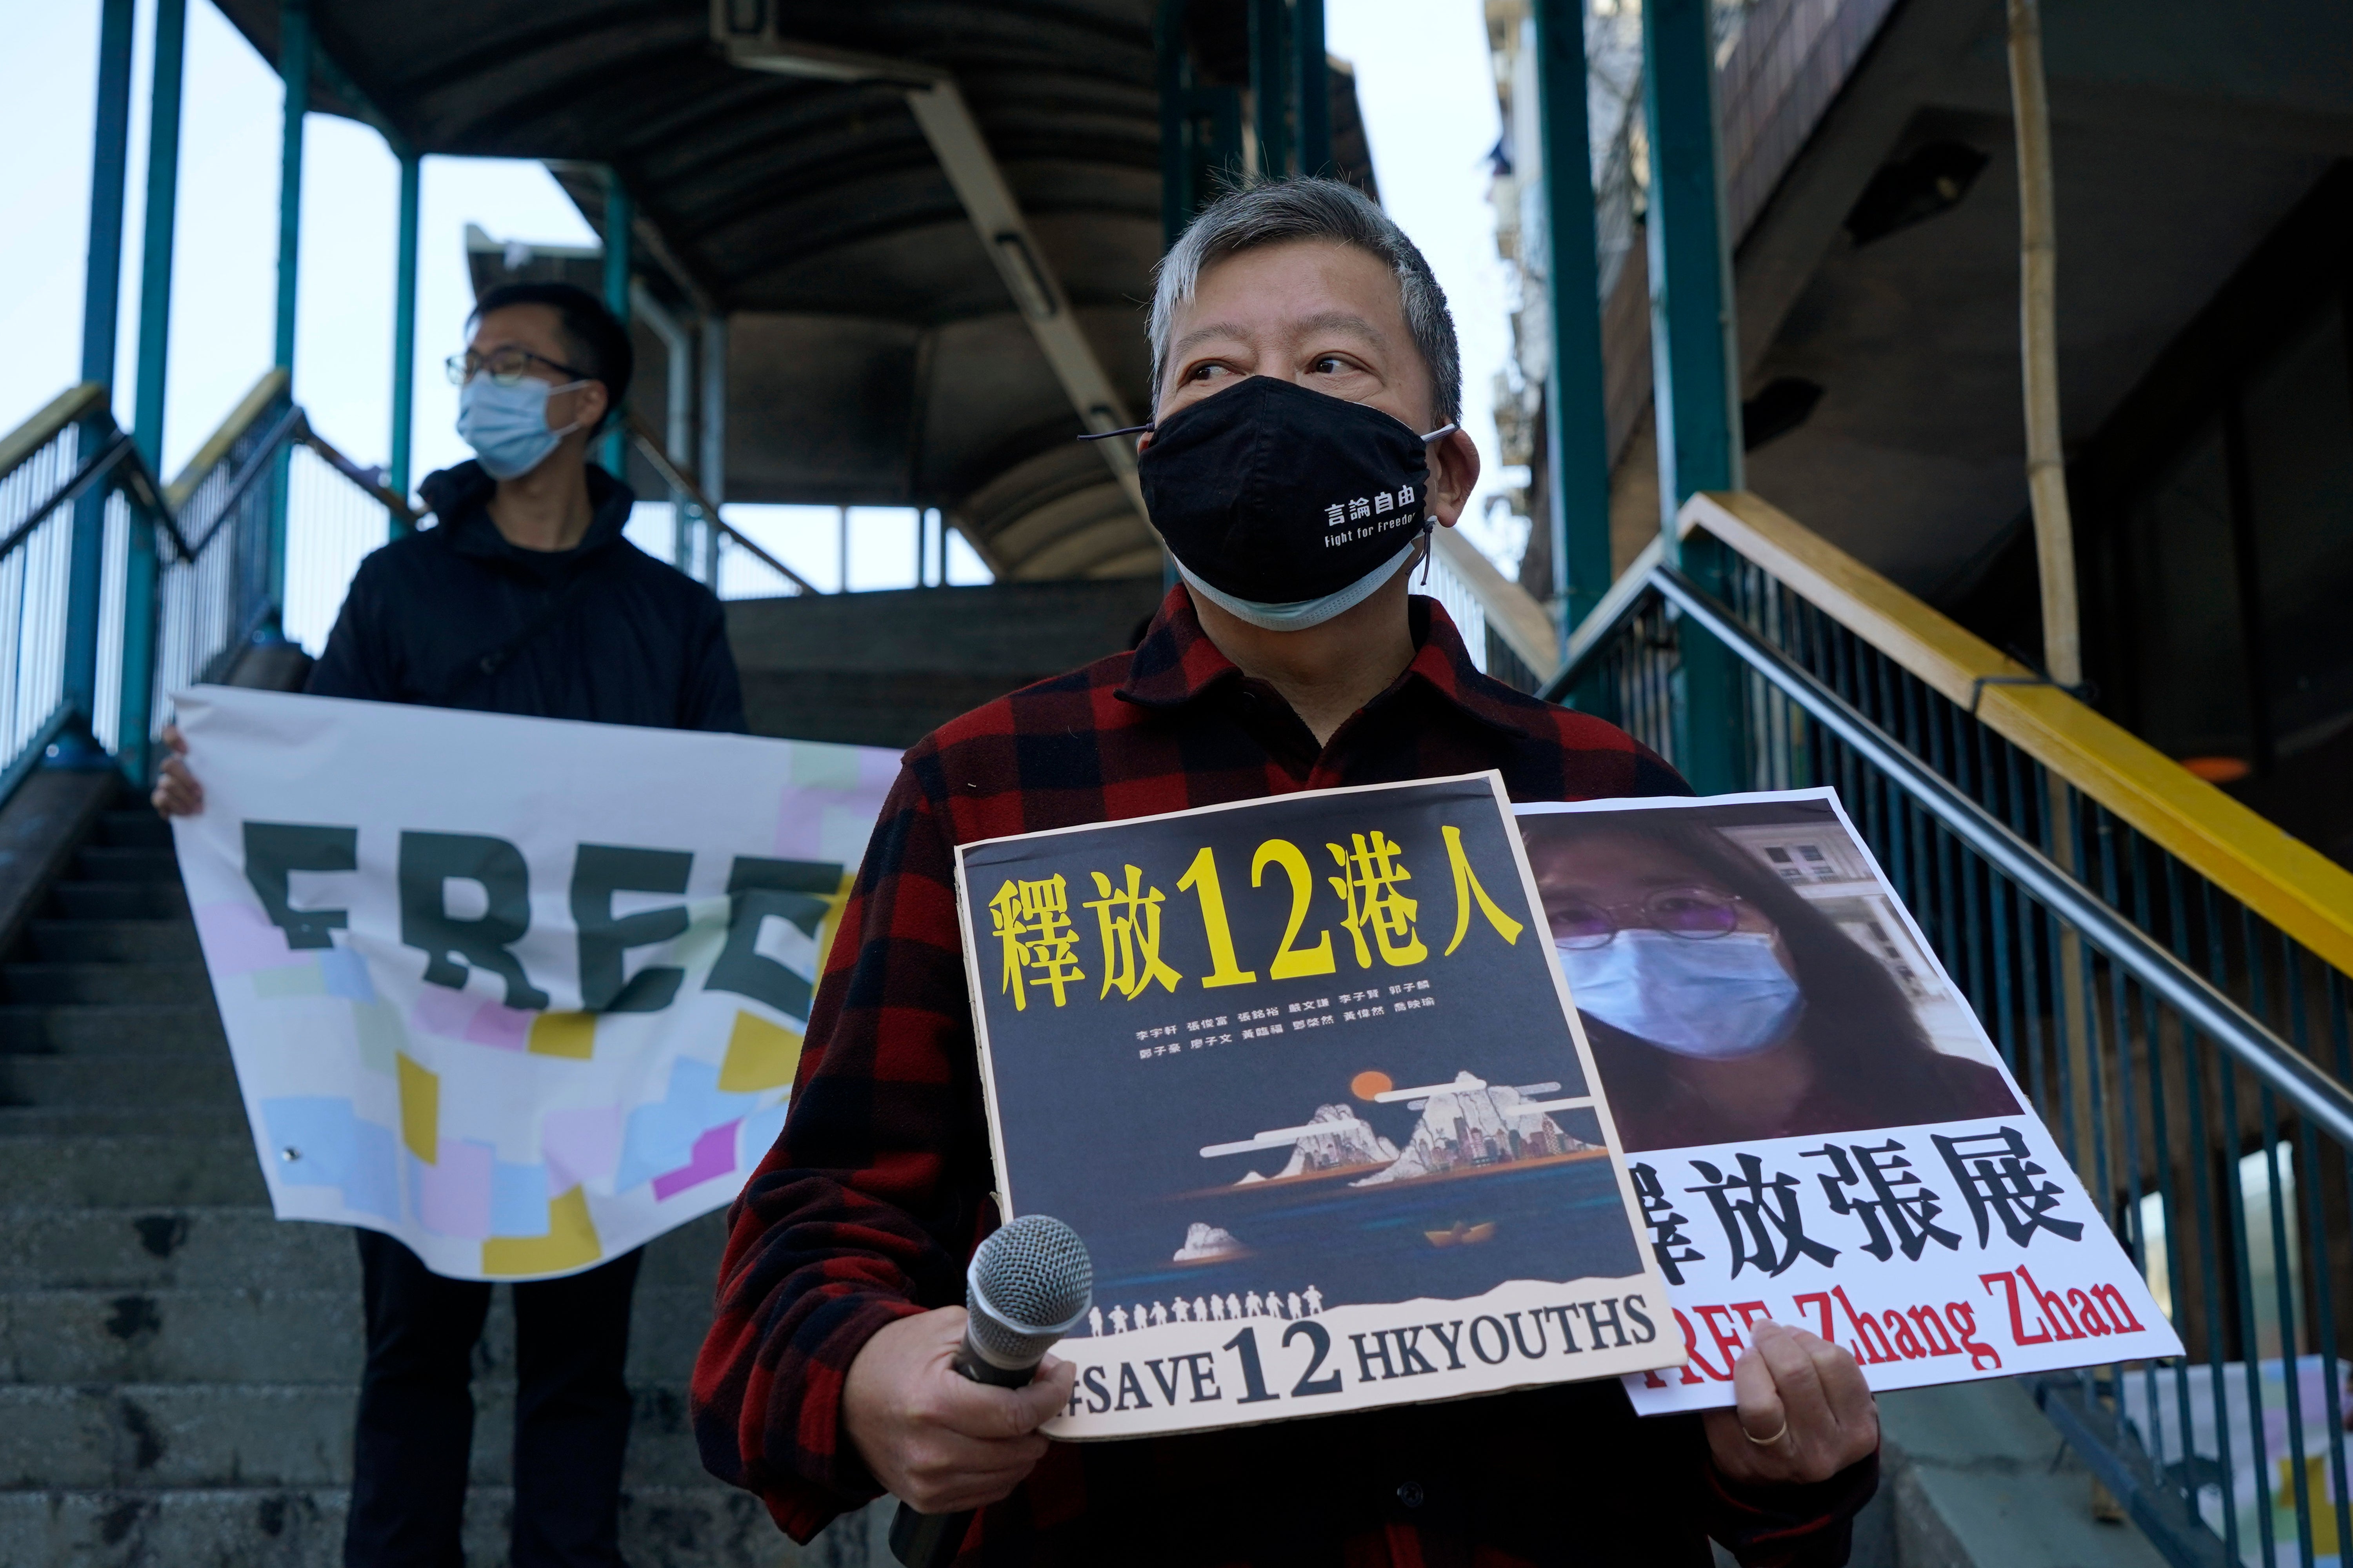 File Image: Democracy activist Lee Cheuk-Yan speaks outside China’s Liaison Office in Hong Kong on December 28, 2020, during a protest calling on China to free a group of Hong Kong activists, as well as Chinese citizen journalist Zhang Zhan